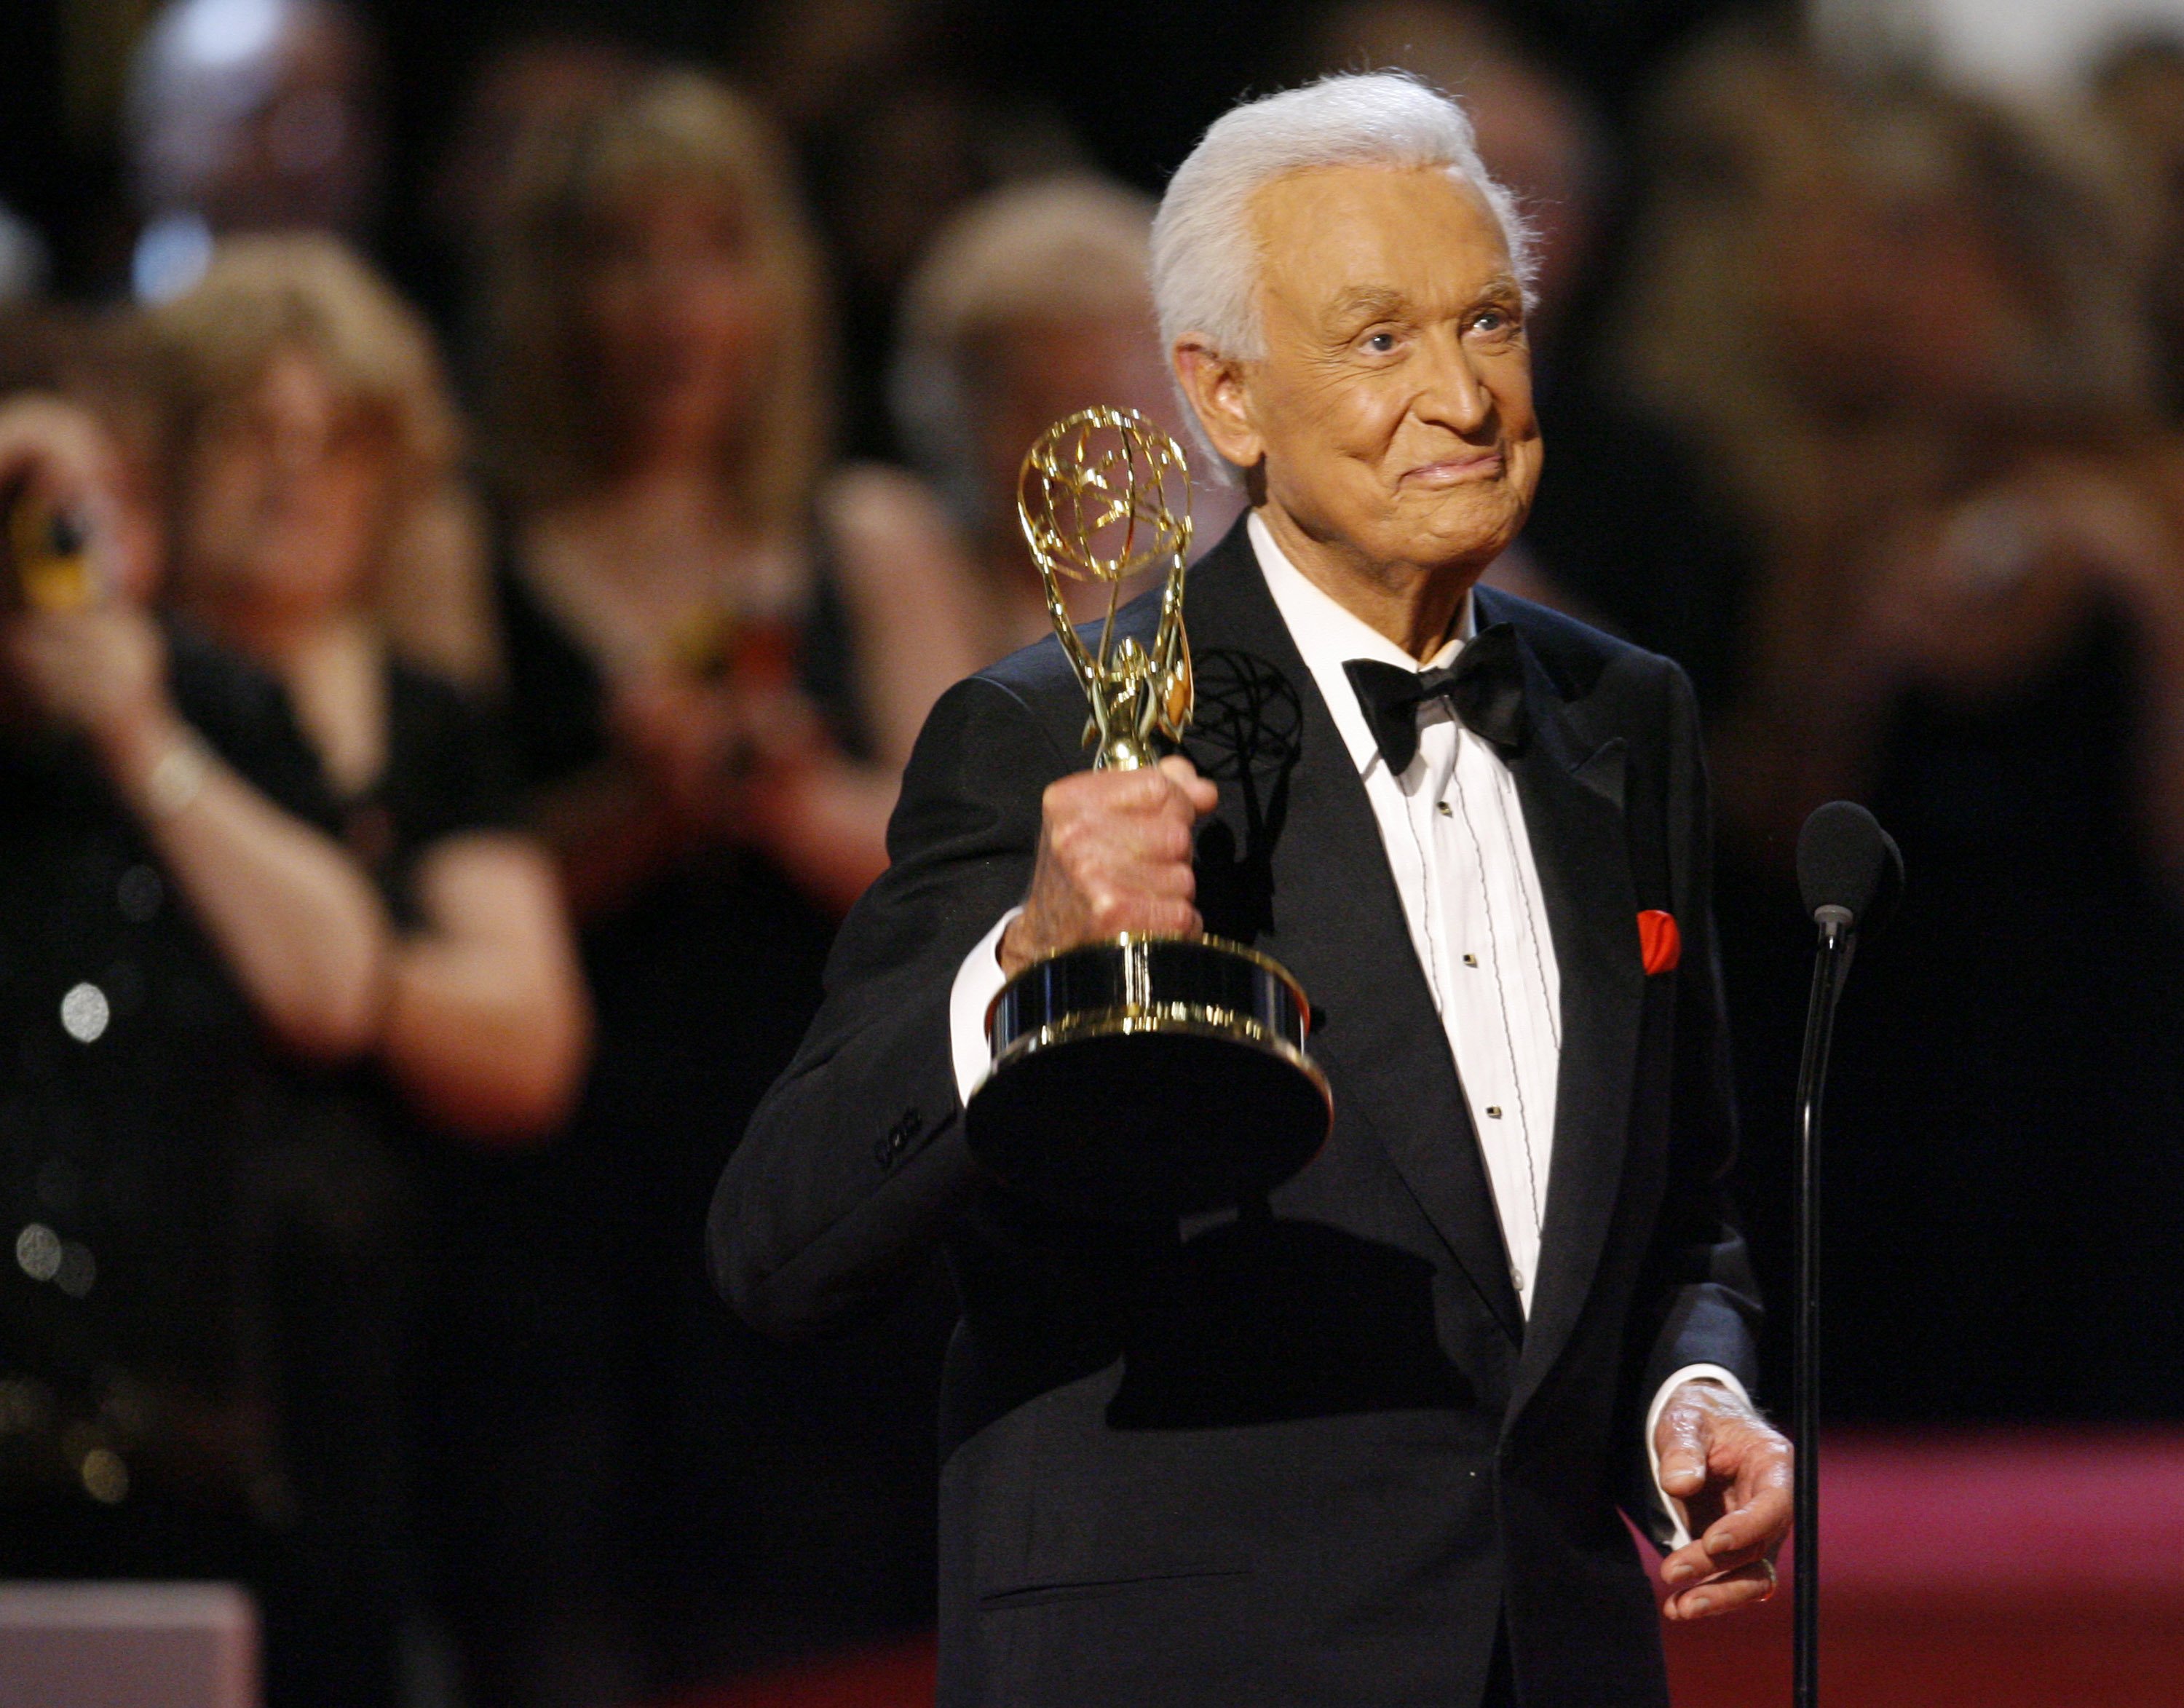 Bob Barker accepts Outstanding Game Show Host award for "The Price is Right" at the 34th Annual Daytime Emmy Awards on 15 June 2007 | Source: Getty Images